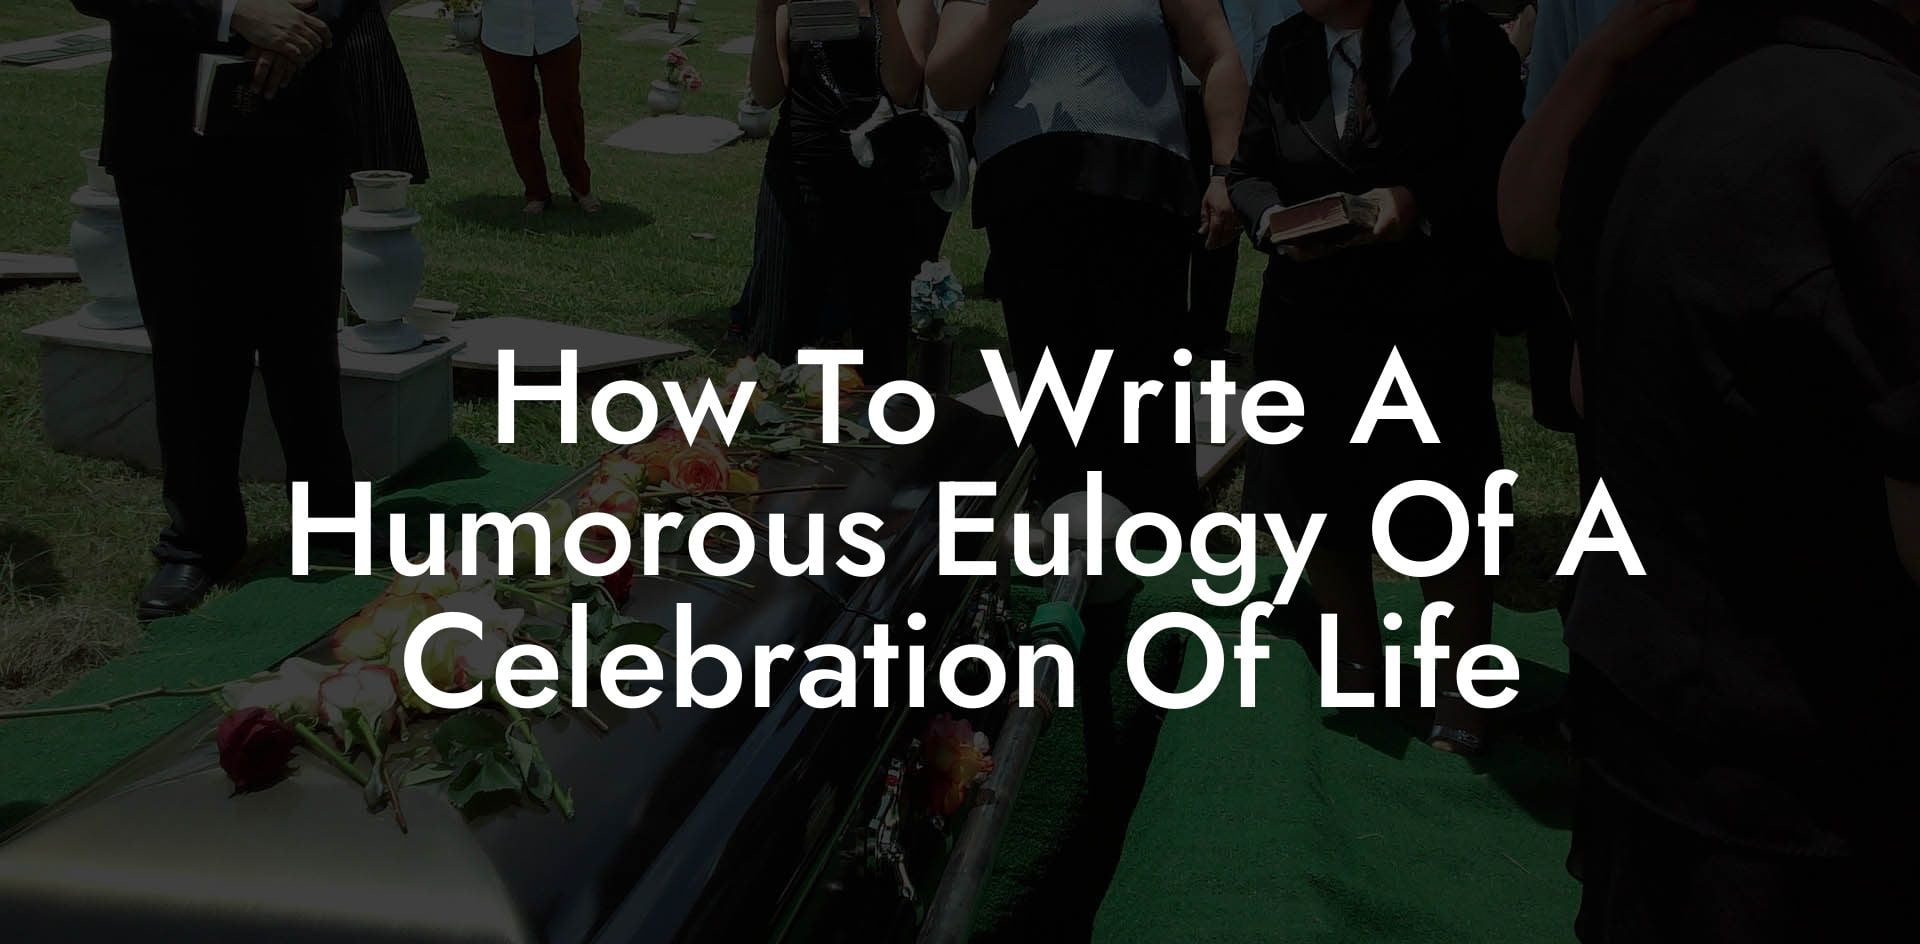 How To Write A Humorous Eulogy Of A Celebration Of Life